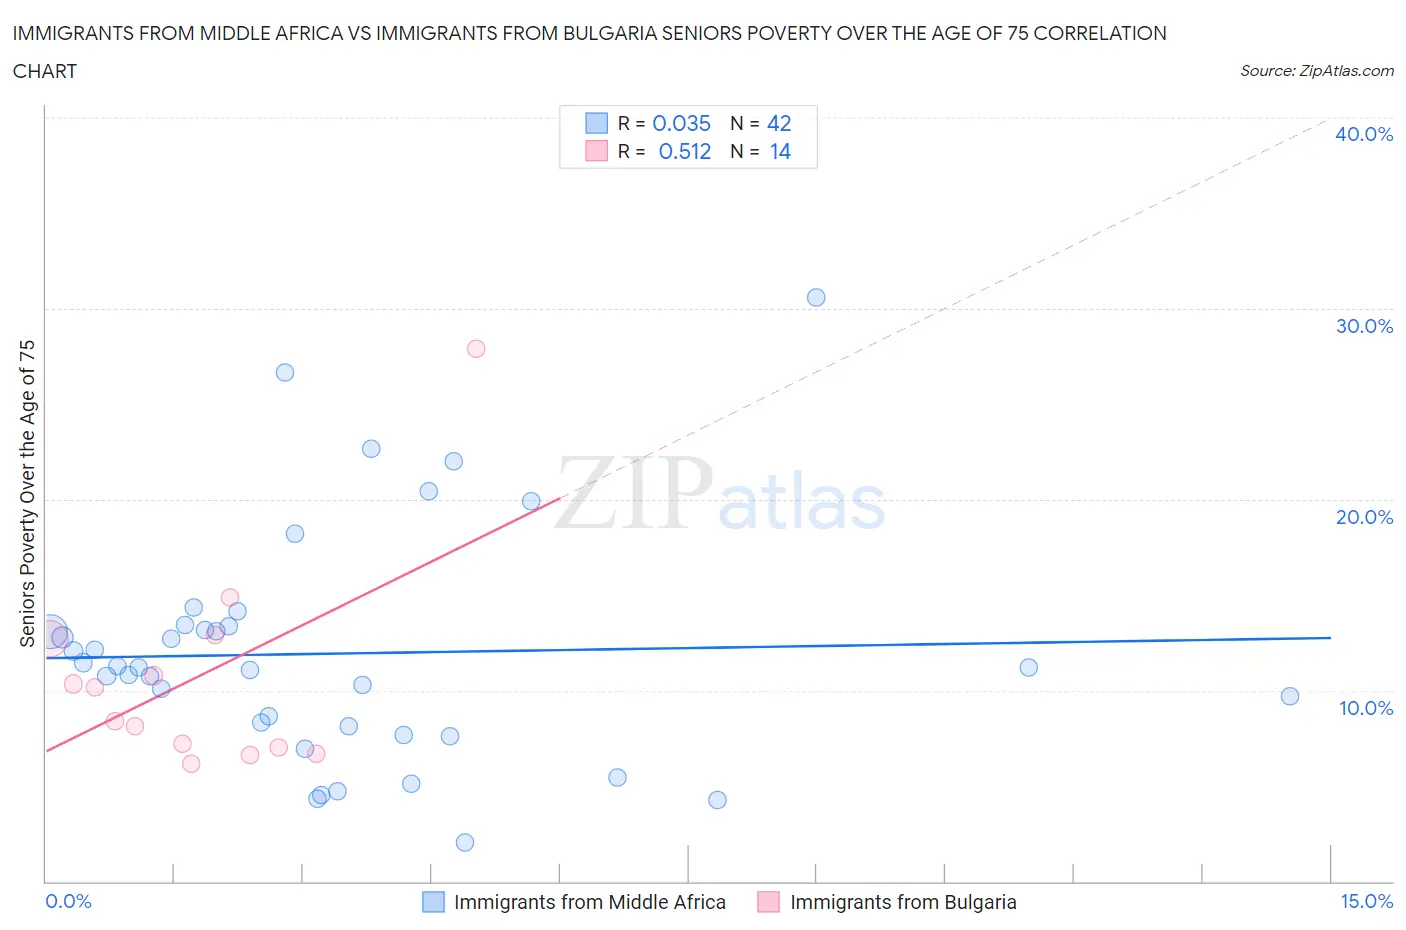 Immigrants from Middle Africa vs Immigrants from Bulgaria Seniors Poverty Over the Age of 75